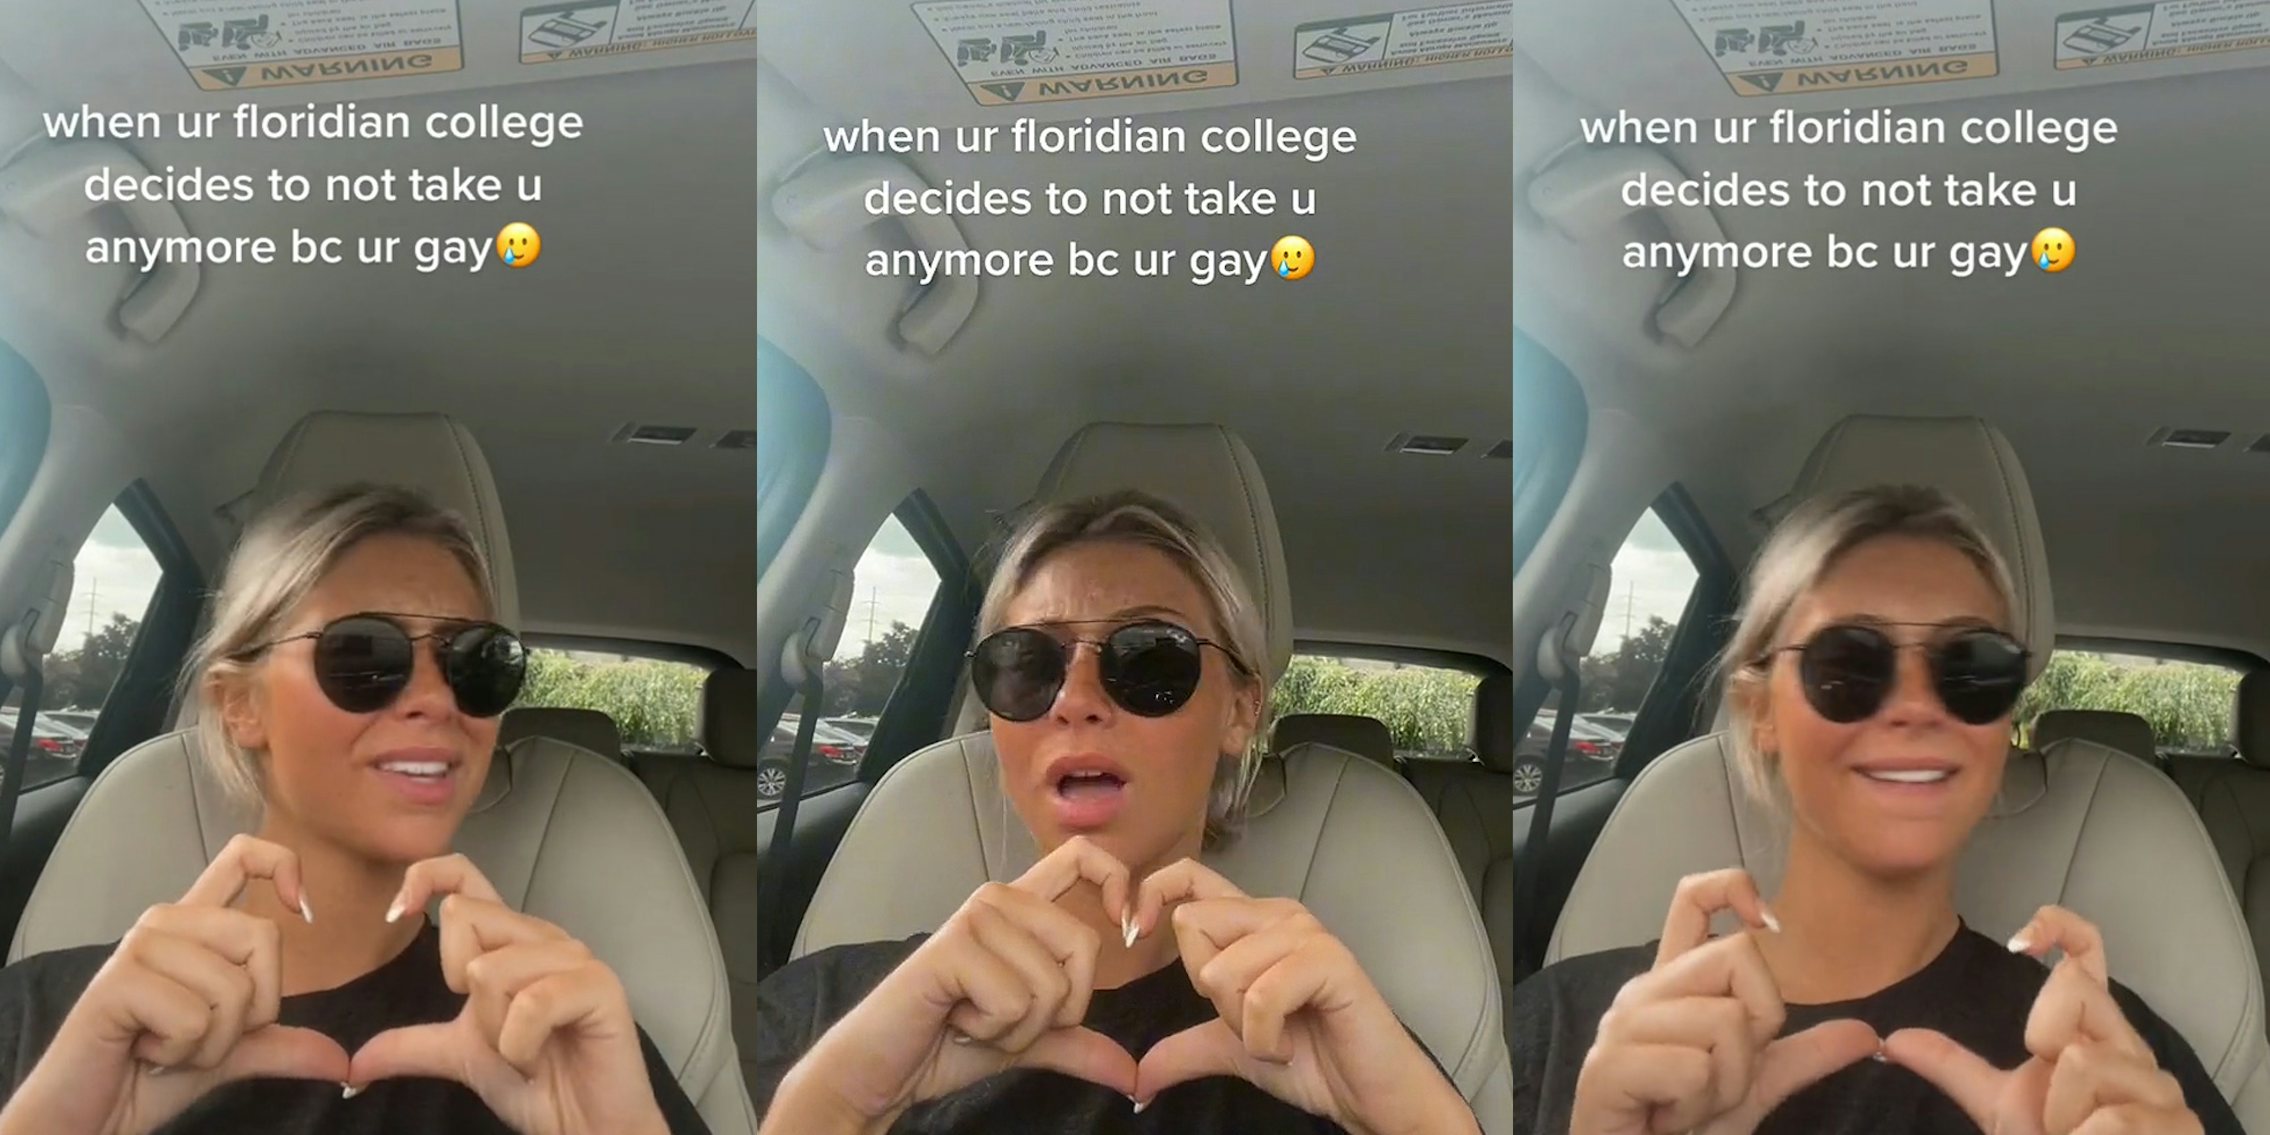 woman in car singing making heart with hands caption 'when ur floridian college decides to not take you anymore bc ur gay' (l) woman in car singing making heart with hands caption 'when ur floridian college decides to not take you anymore bc ur gay' (c) woman in car singing breaking heart with hands caption 'when ur floridian college decides to not take you anymore bc ur gay' (r)